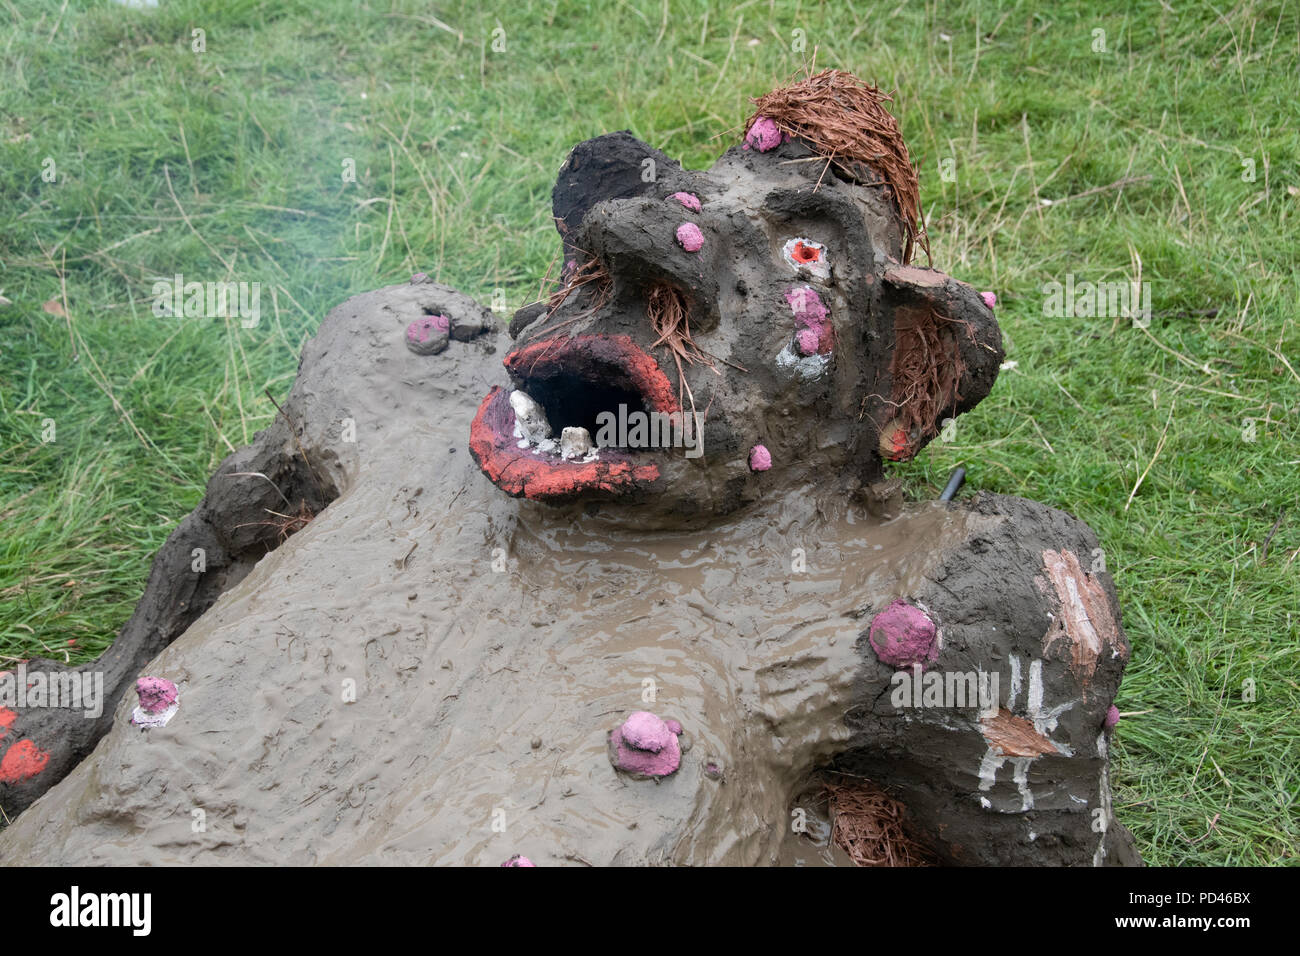 Chepstow, Wales – Aug 14: Make-up decorates the face of a newly made troll faced wood fired earth oven on 14 Aug 2015 at The Green Gathering Stock Photo